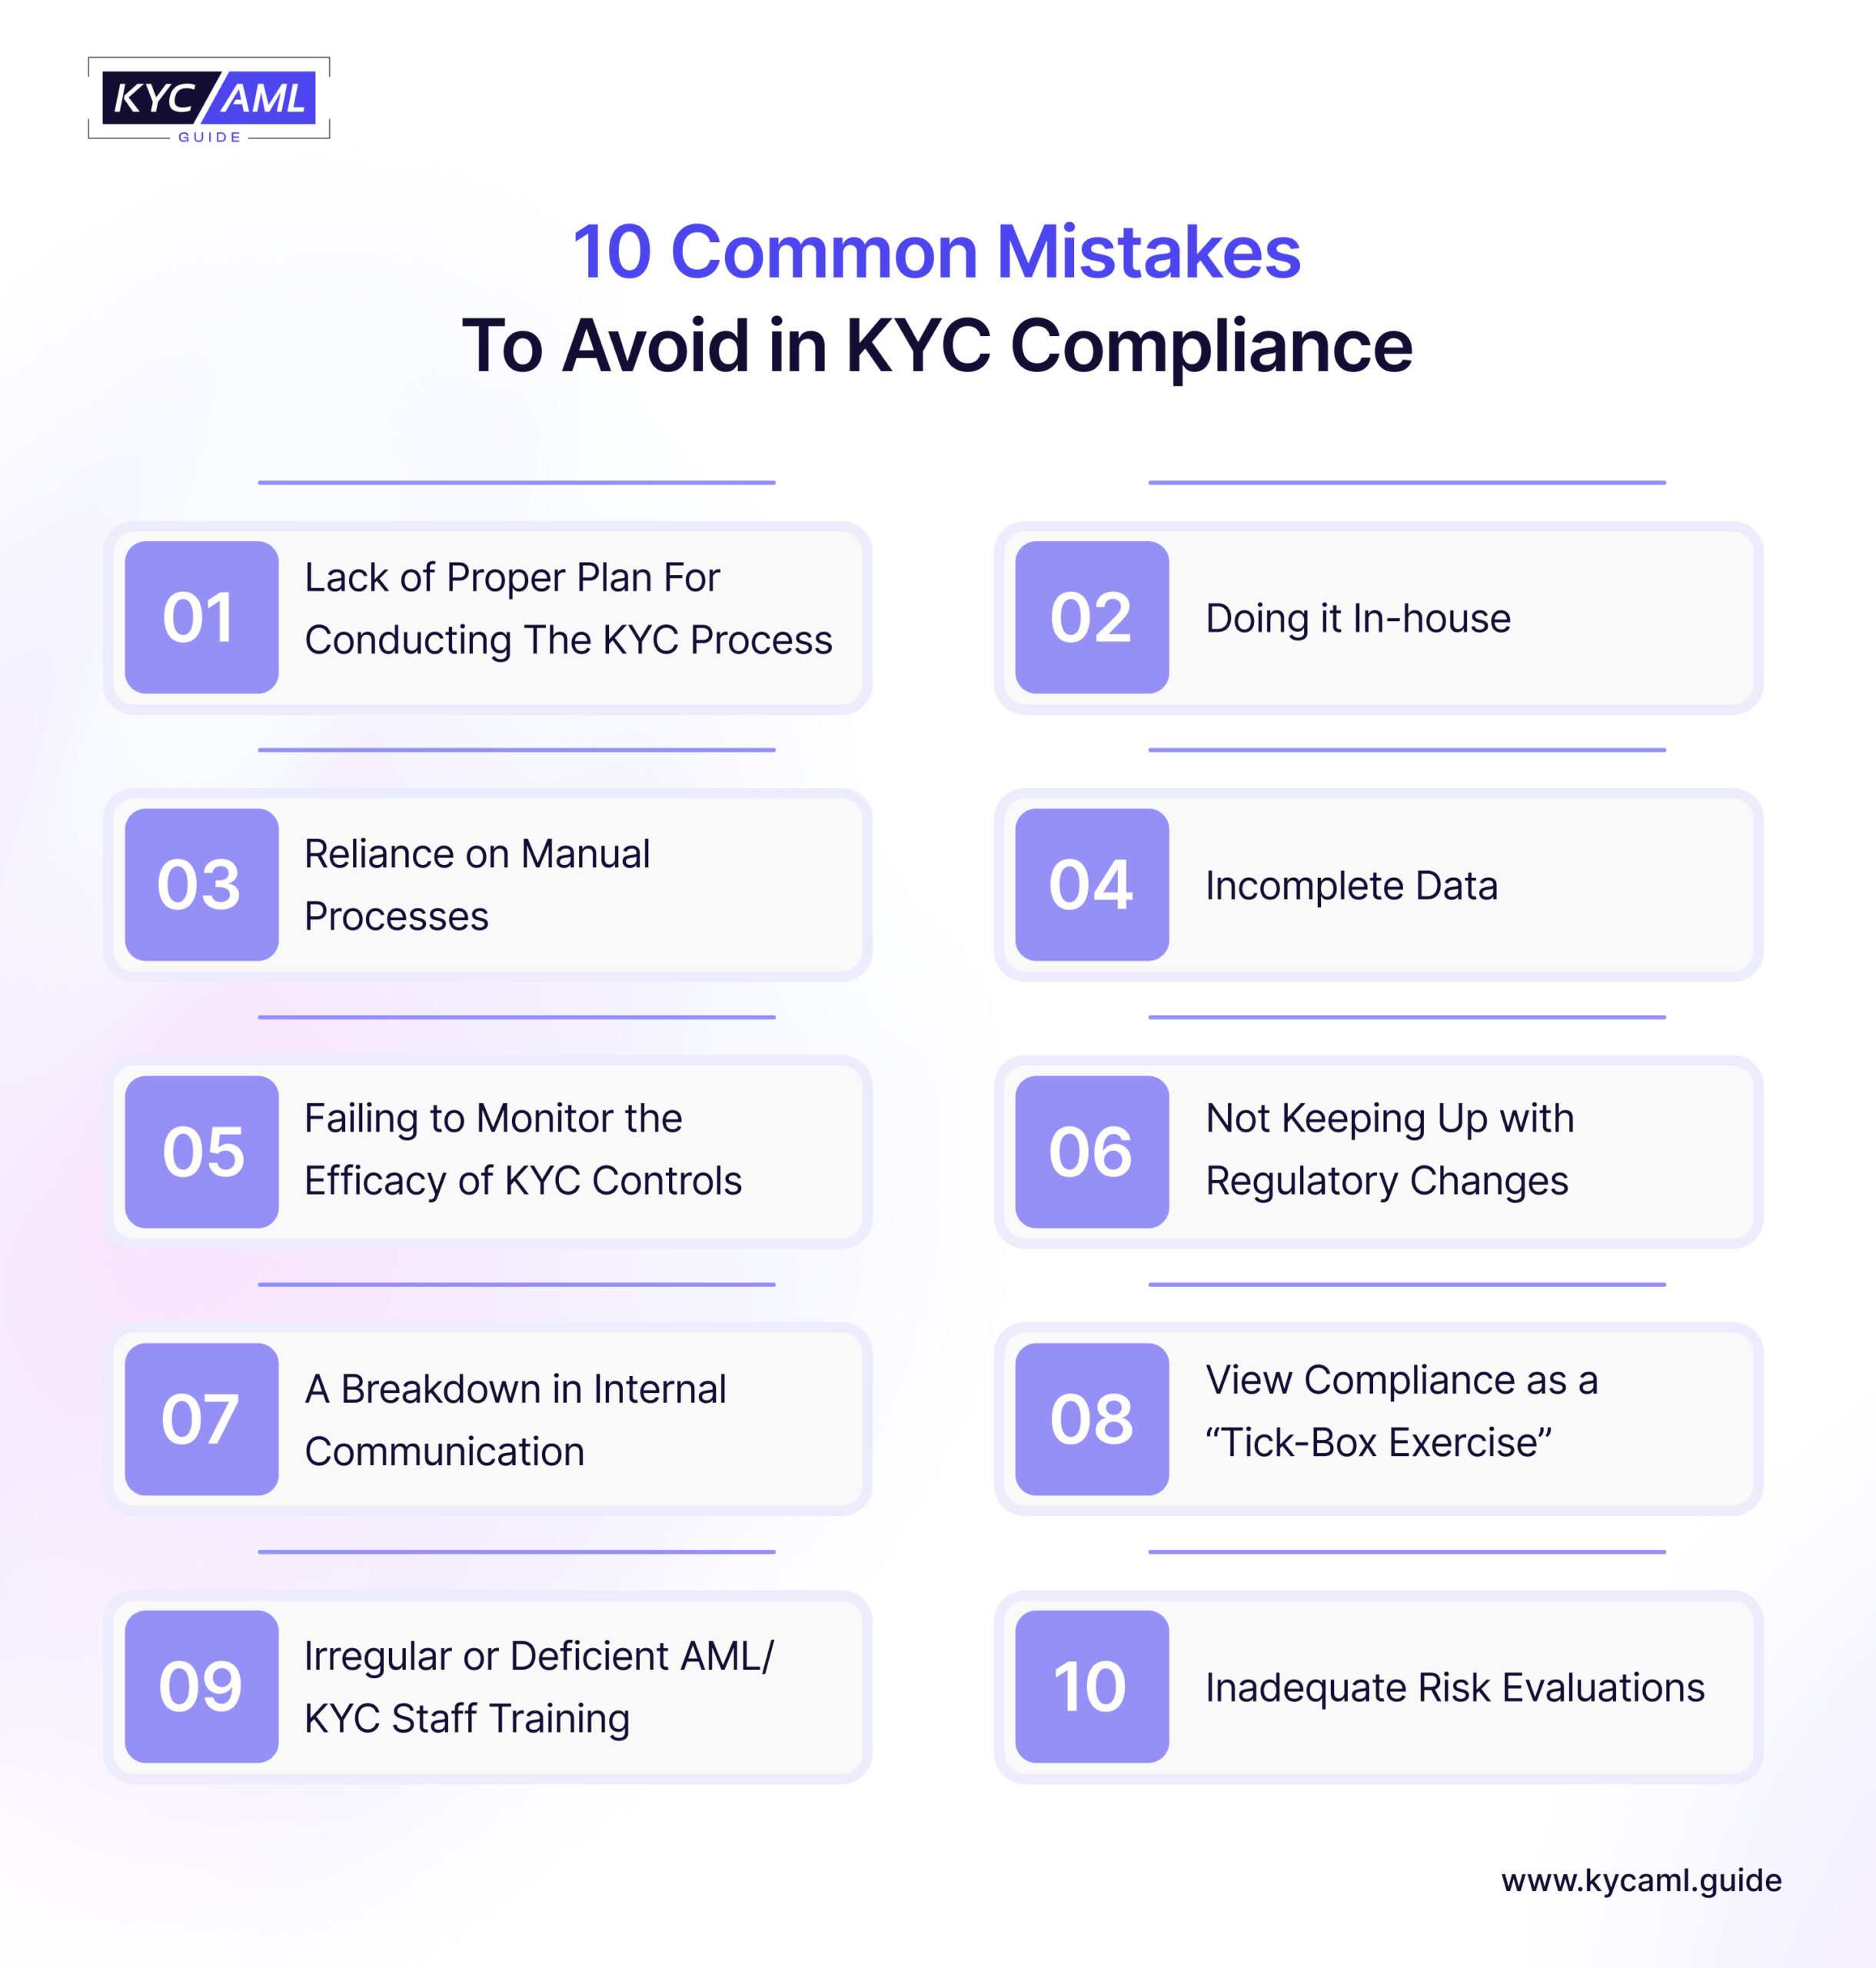 This infographic shows the top 10 common mistakes that businesses usually make while implementing and following KYC regulations.  